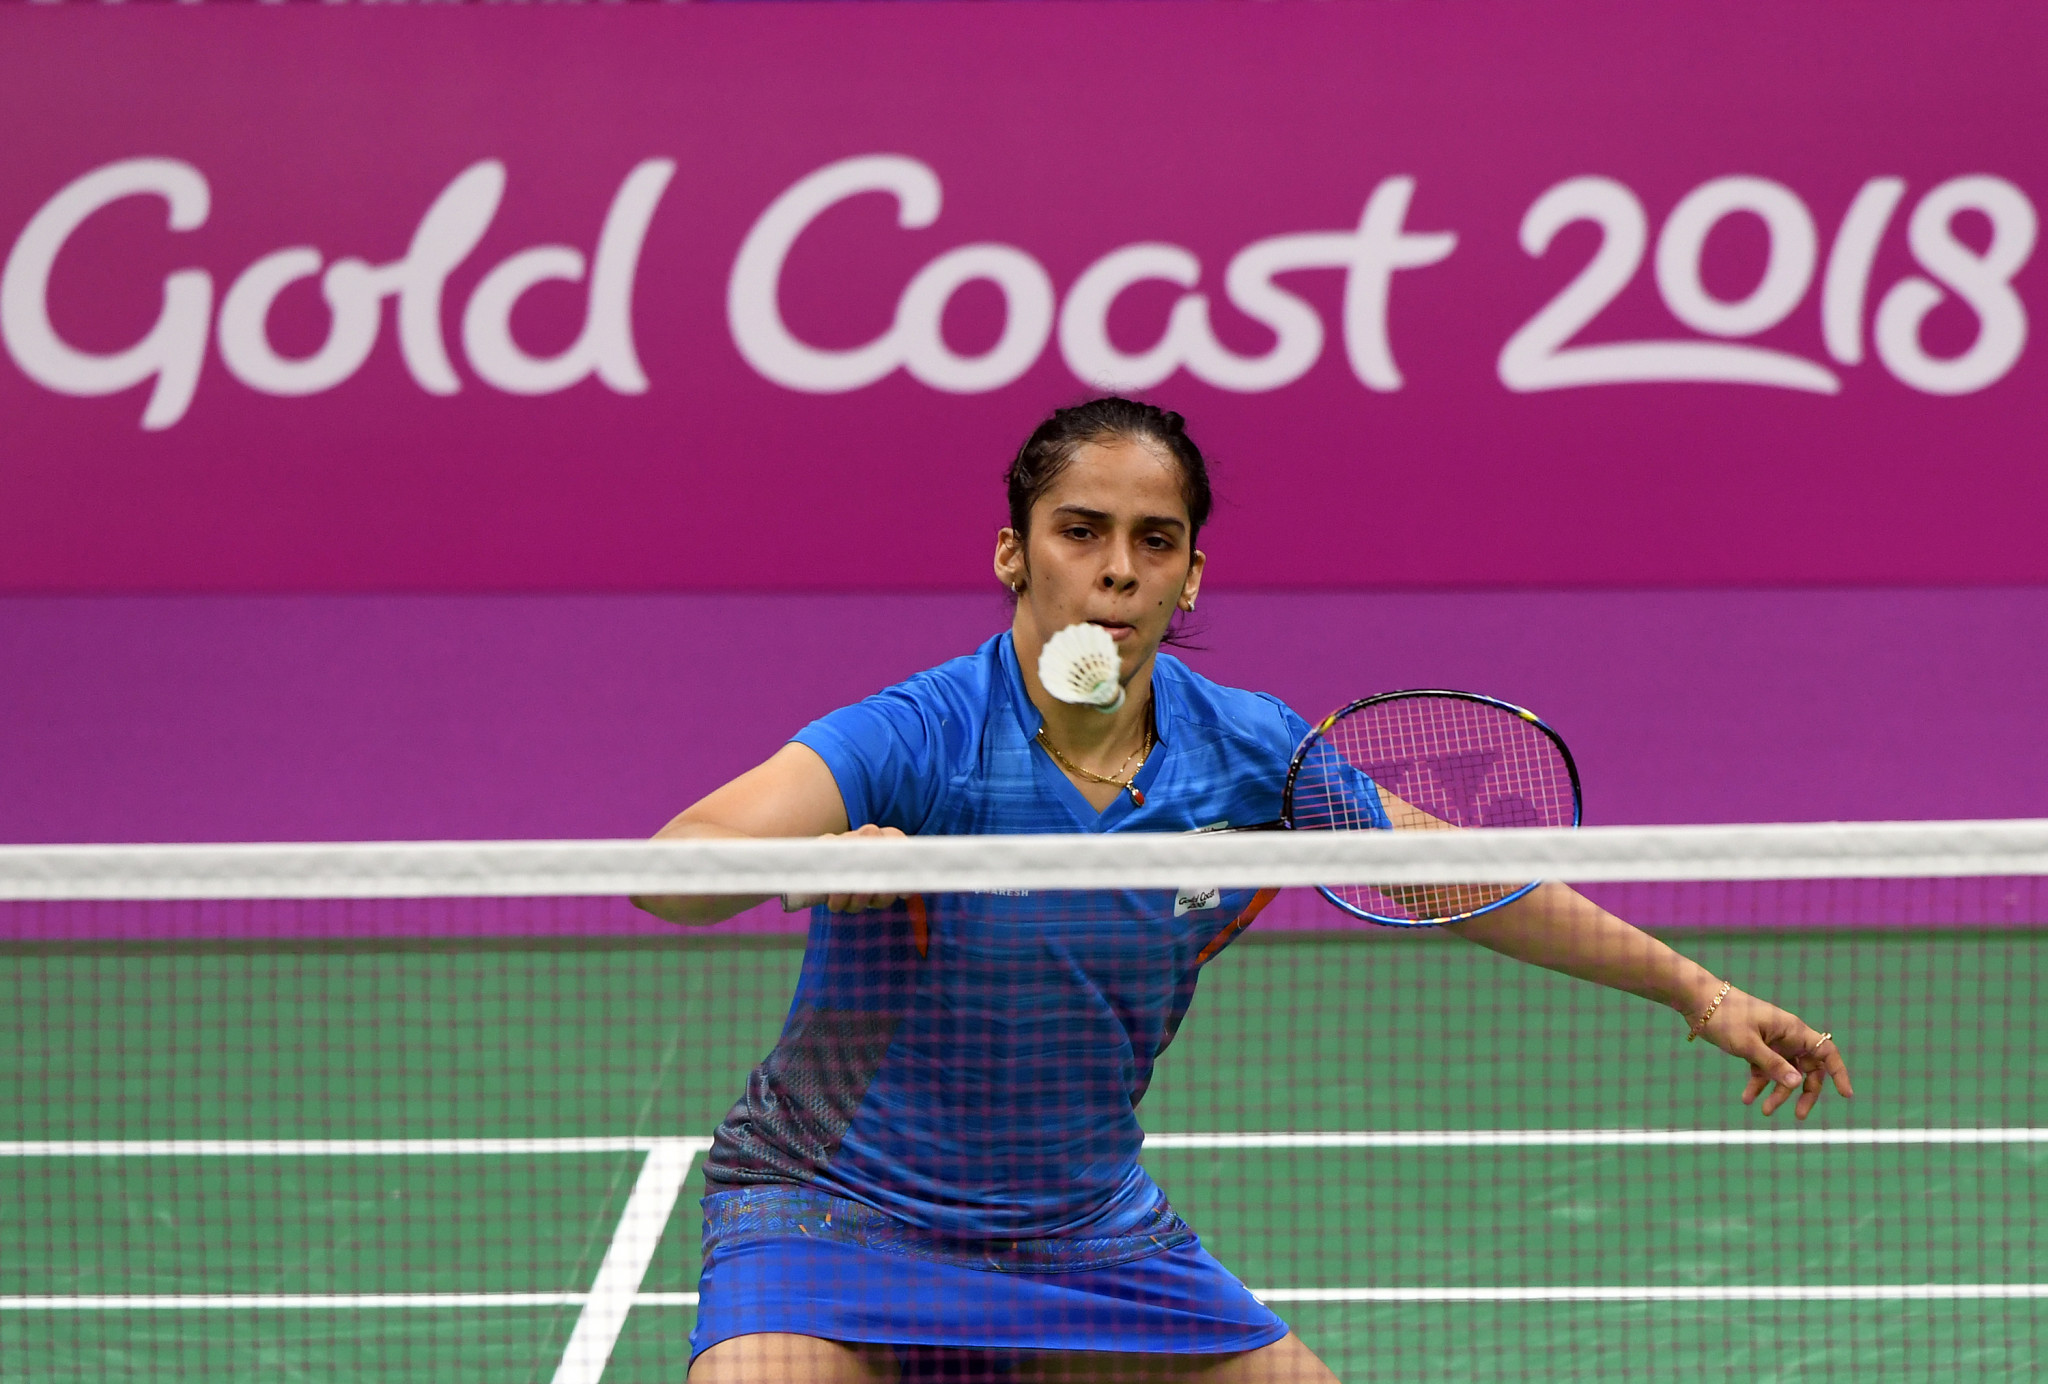 Indian badminton star Saina Nehwal beat compatriot and favourite PV Sindhu to seal the women's singles title ©Getty Images